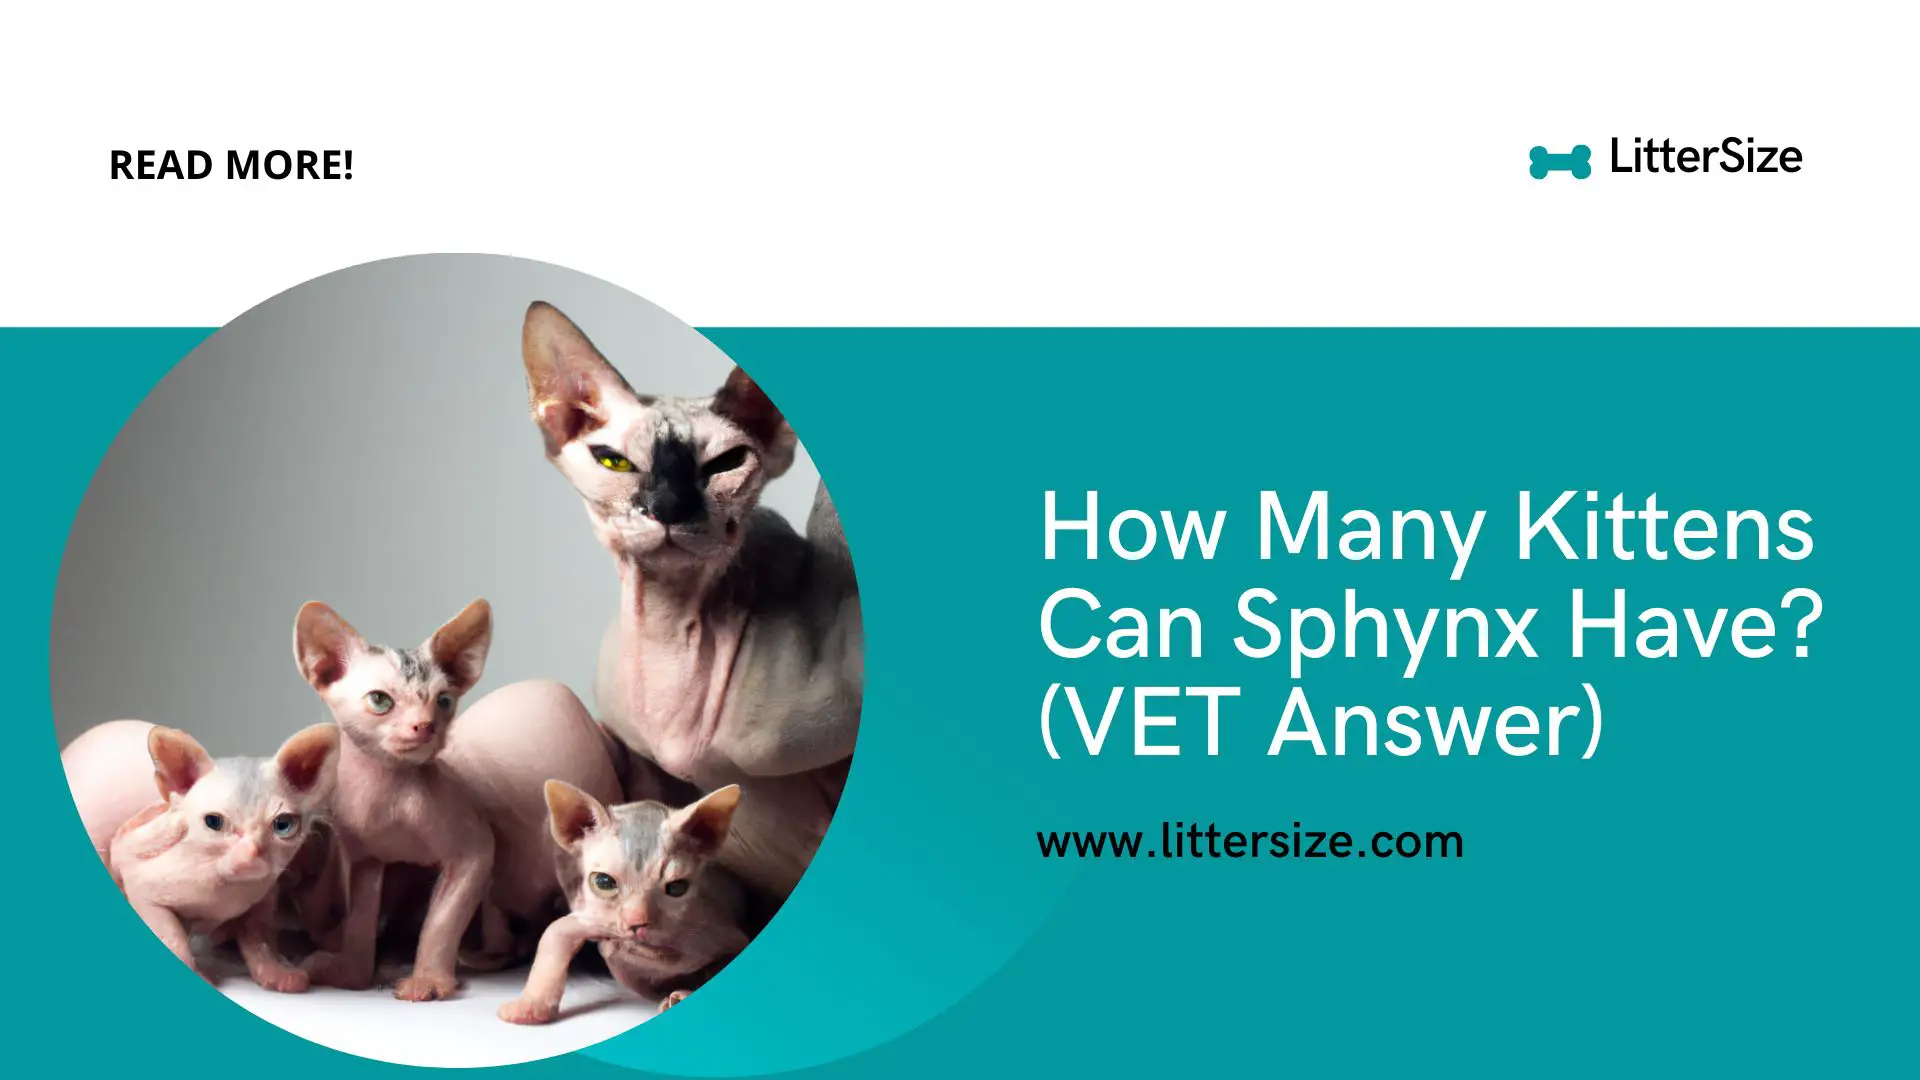 How Many Kittens Can Sphynx Have? (VET Answer)